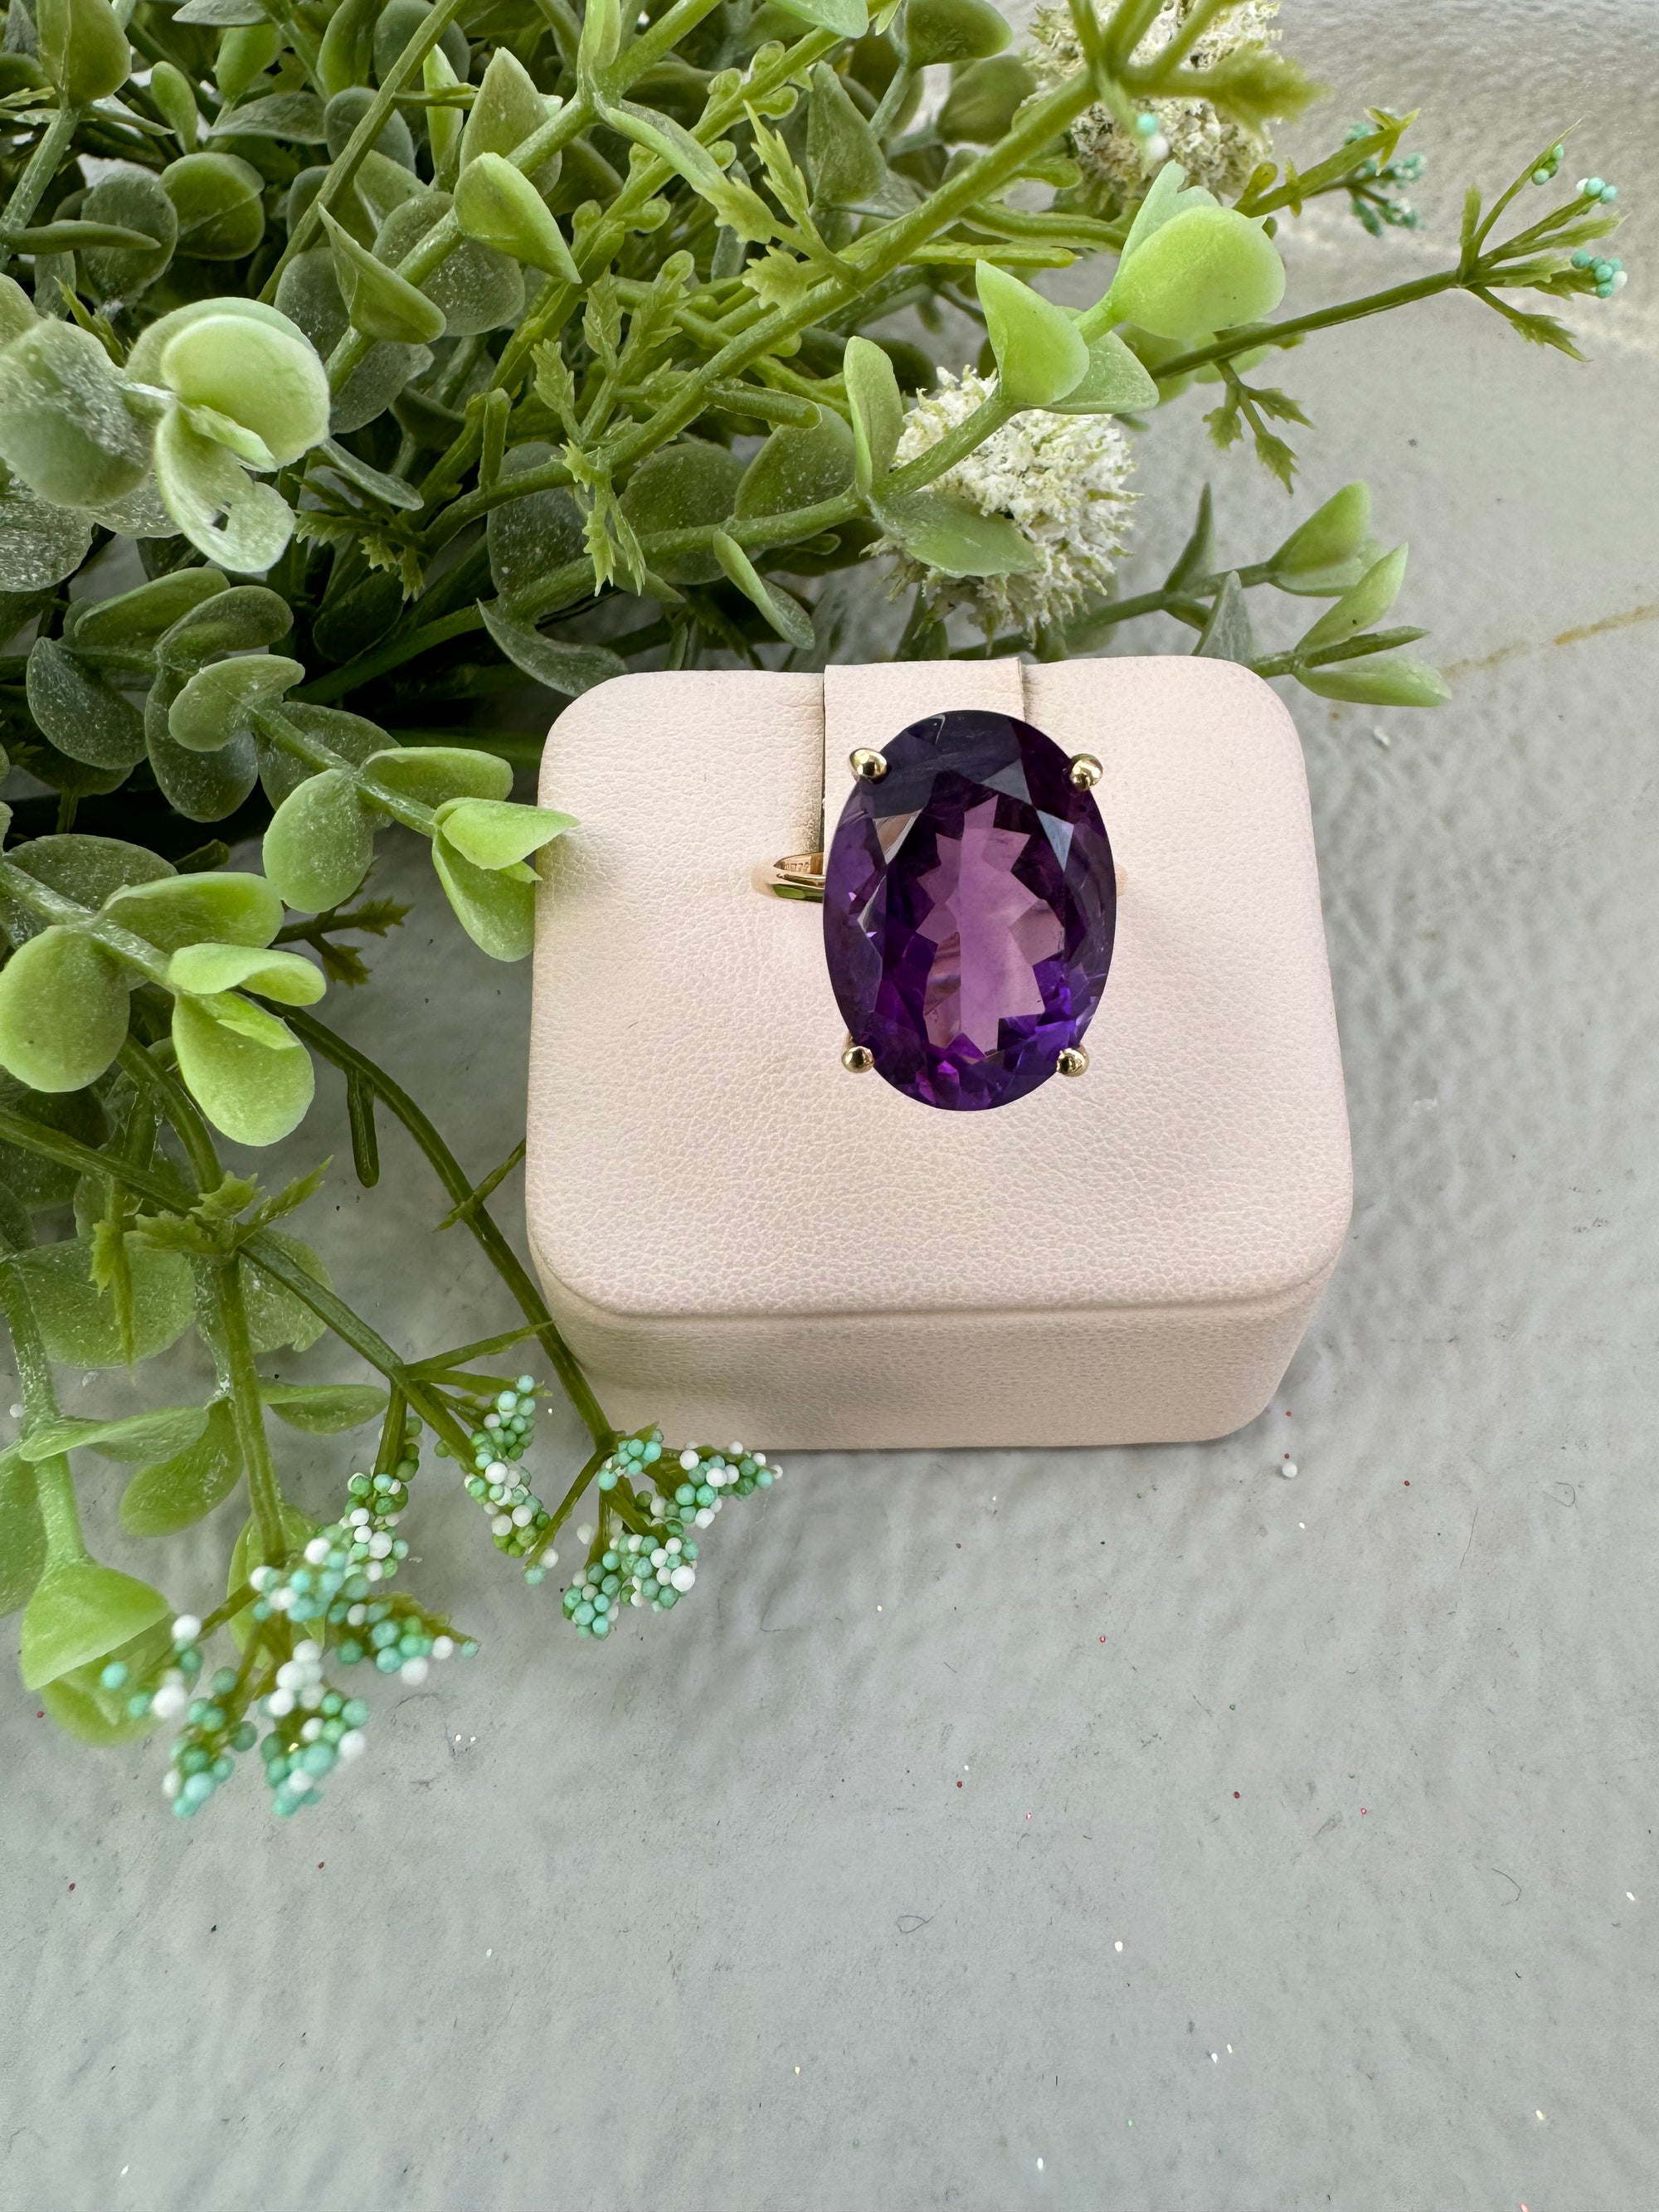 Large Oval Amethyst Ring